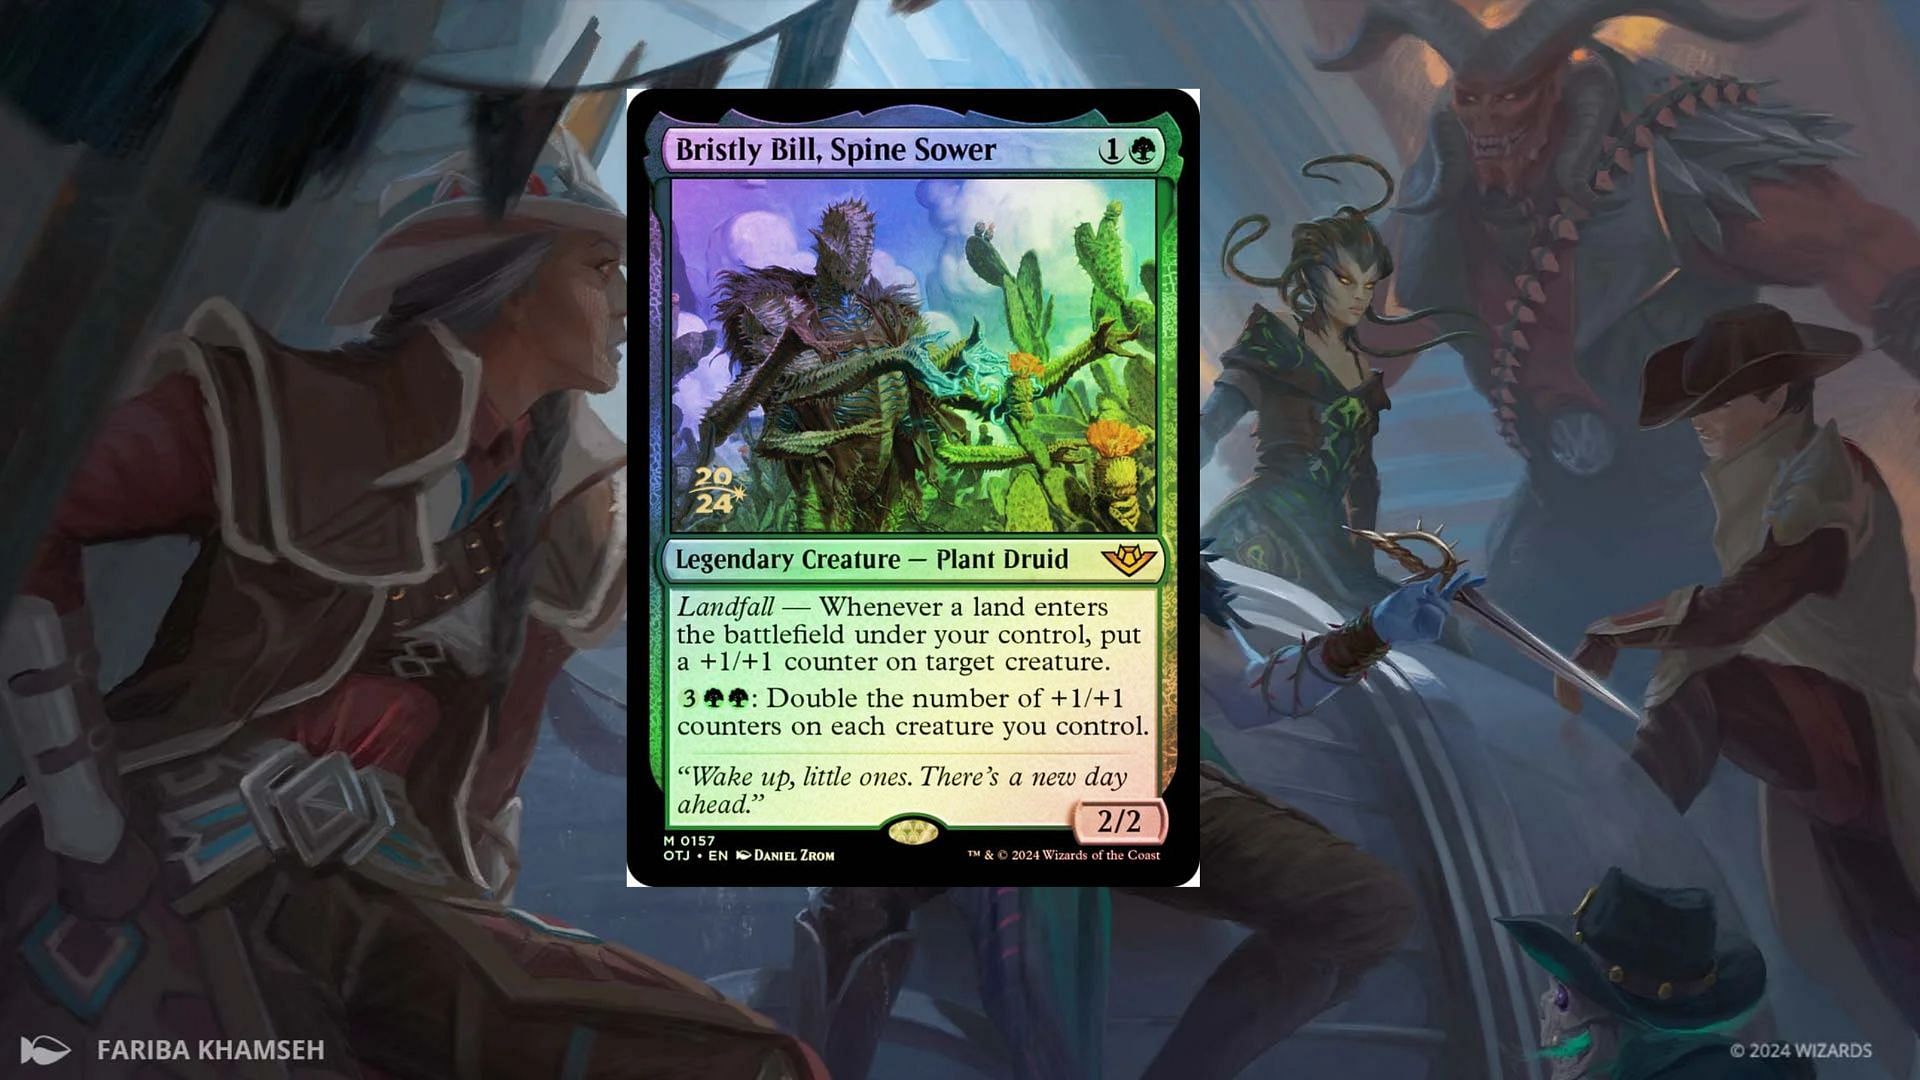 Bristly Bill makes your creatures so much bigger in MTG (Image via Wizards of the Coast)